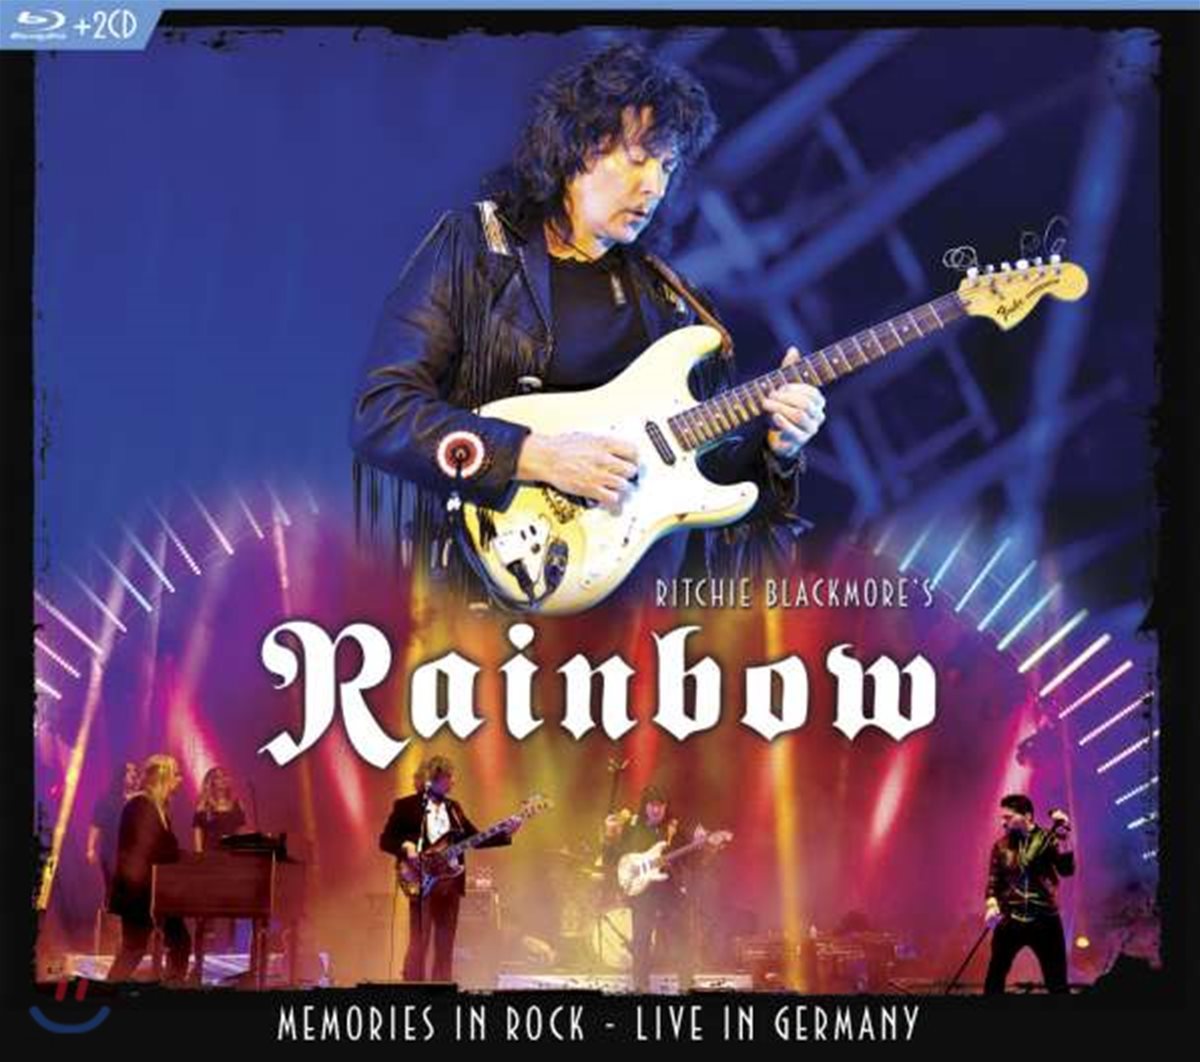 Ritchie Blackmore's Rainbow - Memories In Rock: Live In Germany 리치 블랙모어스 레인보우 2016년 독일 라이브 블루레이